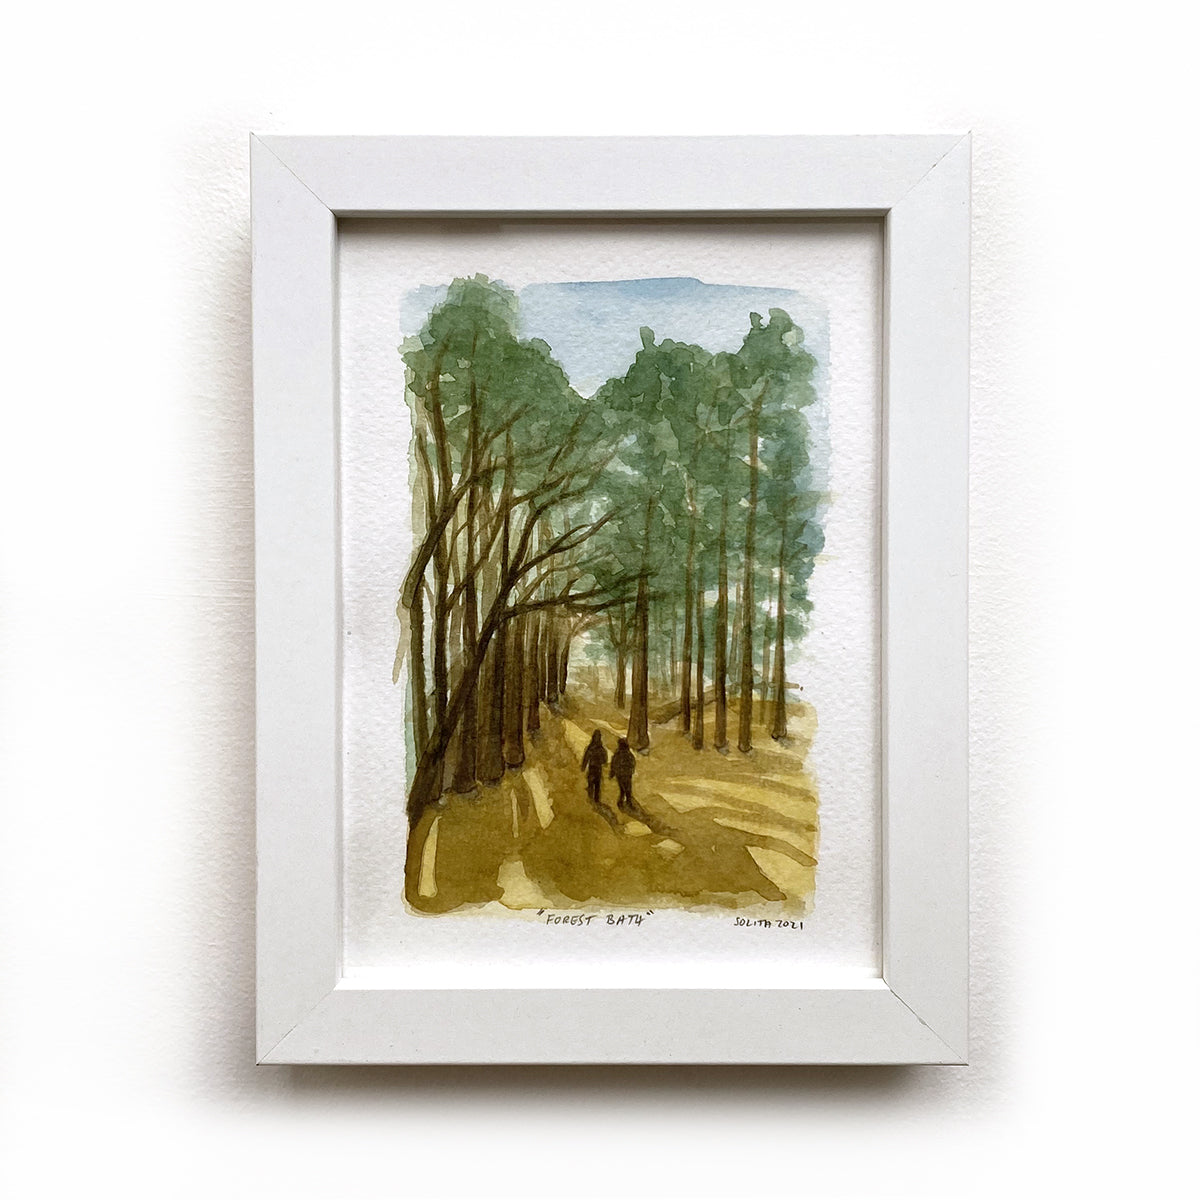 Watercolour painting of people walking under a tree canopy. Framed.